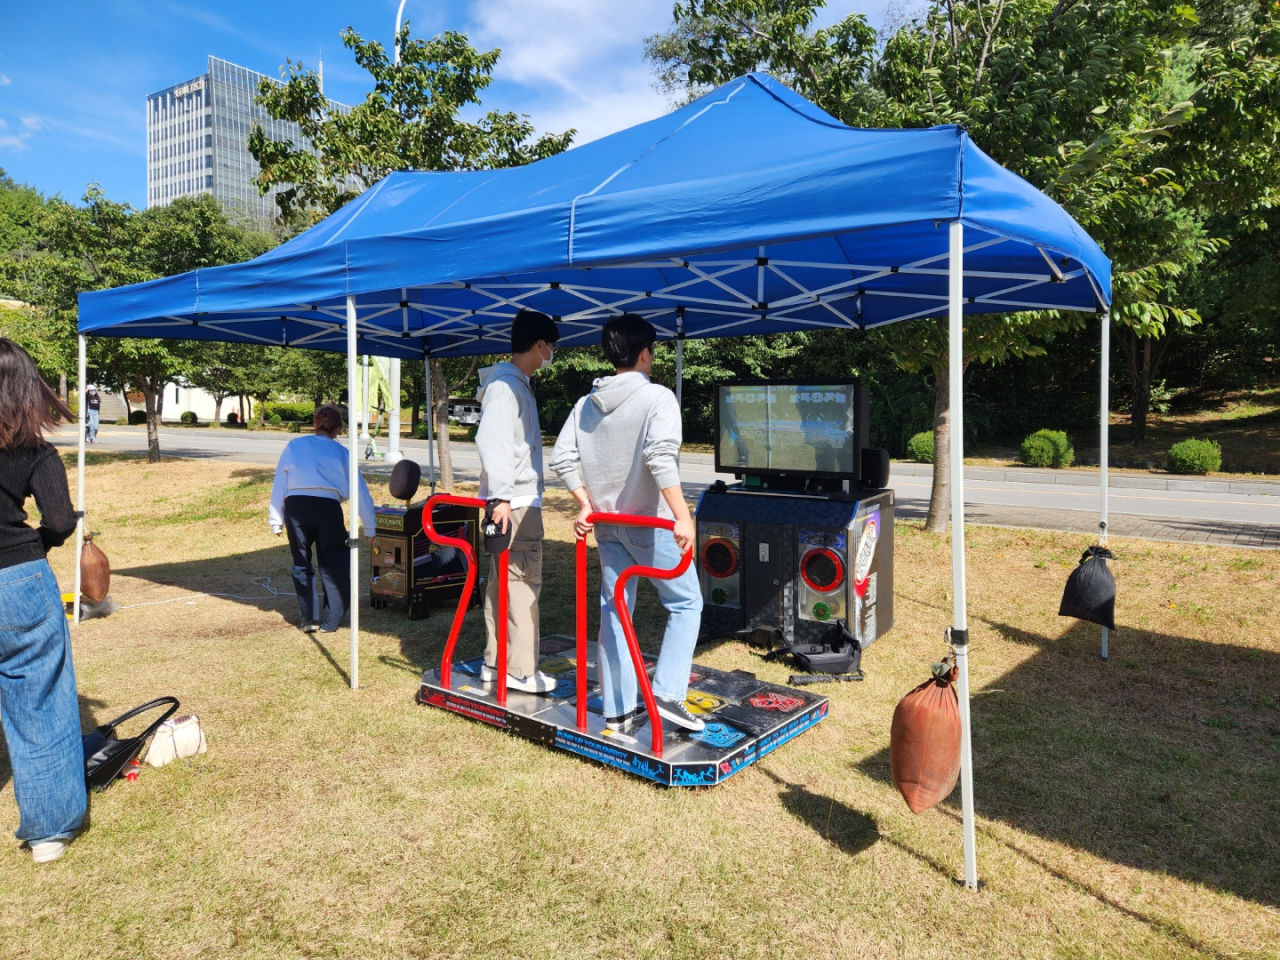 Students play on a Pump It Up dance machine at Seoul National University of Science and Technology's fall festival held on Sept. 23. (Choi Jae-hee / The Korea Herald)